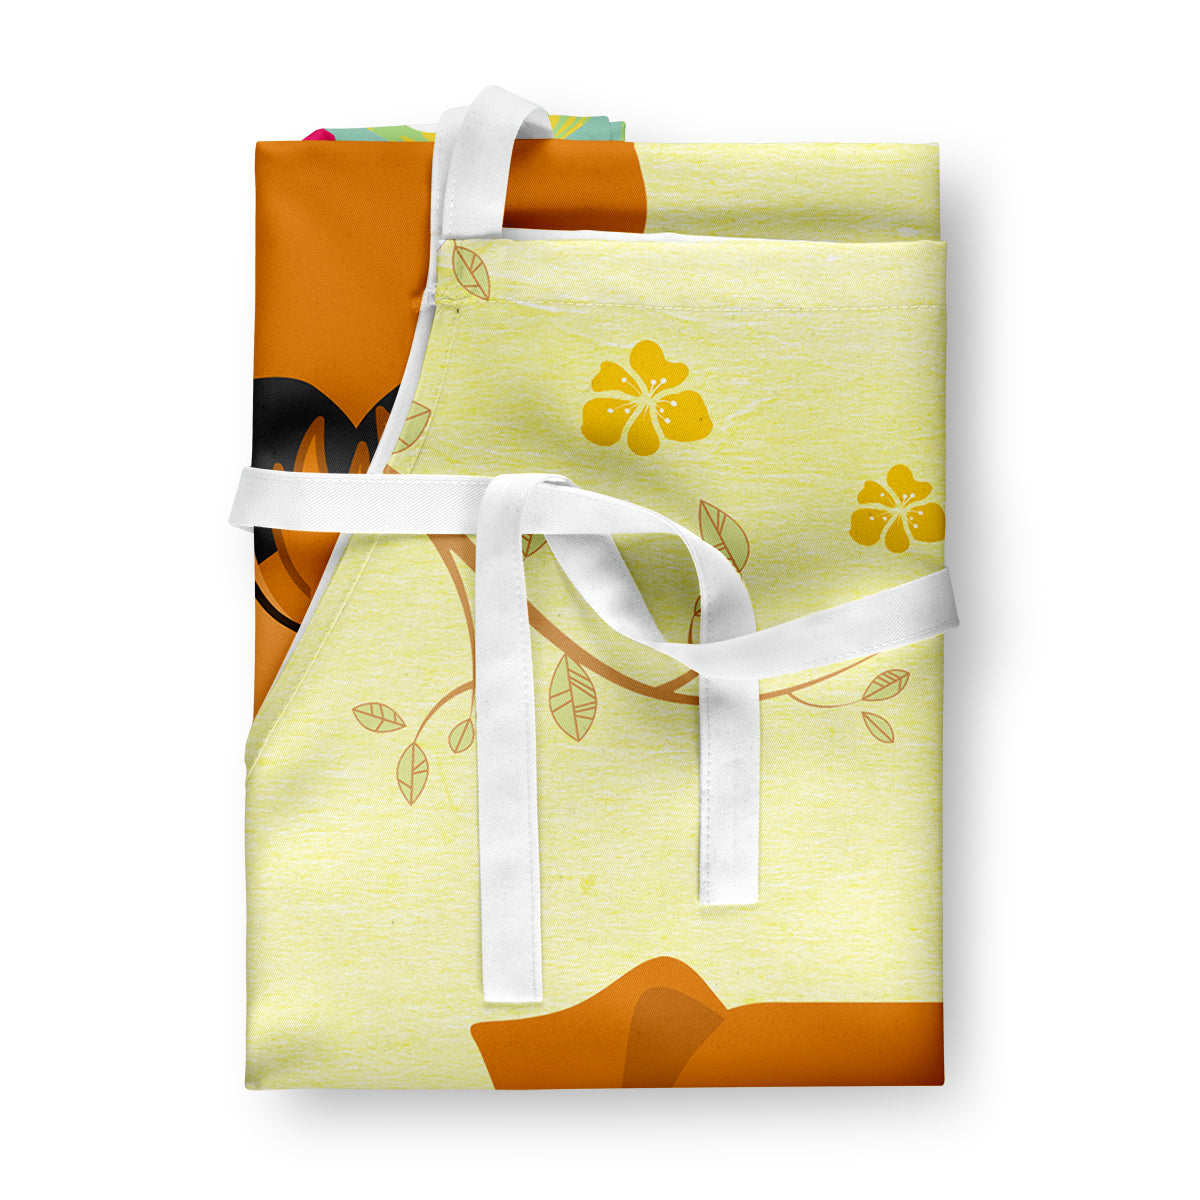 Easter Eggs Airedale Apron BB6041APRON